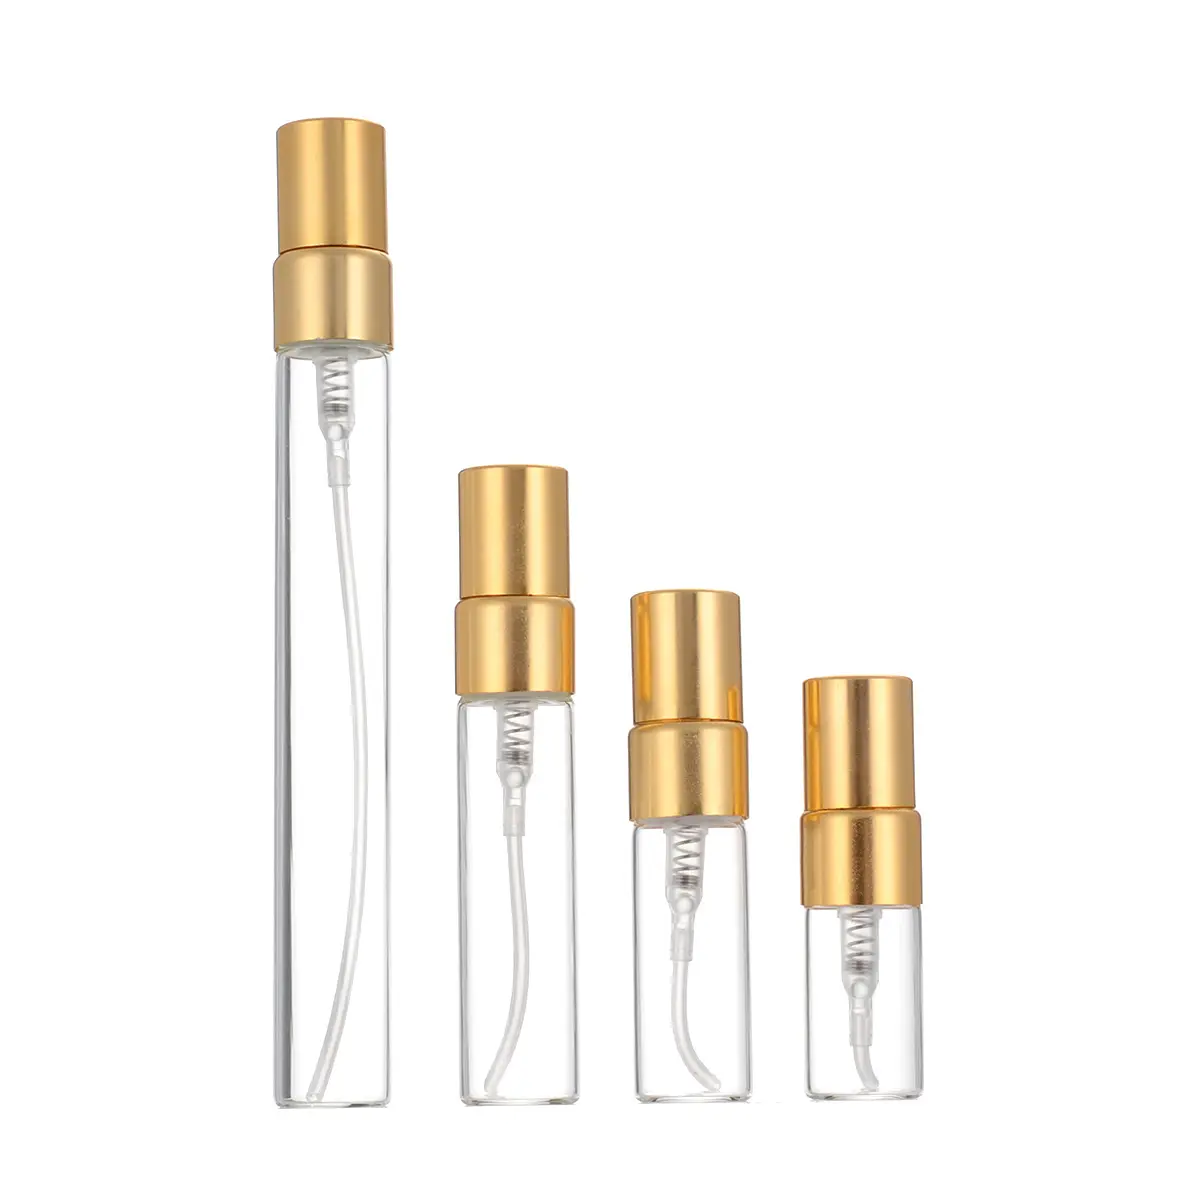 BYPE BY PERFUME Wholesale Round 2ml 3ml 5ml 10ml Mini Empty Clear Spray Bottle Refillable Glass Perfume Sample Atomizer Tester